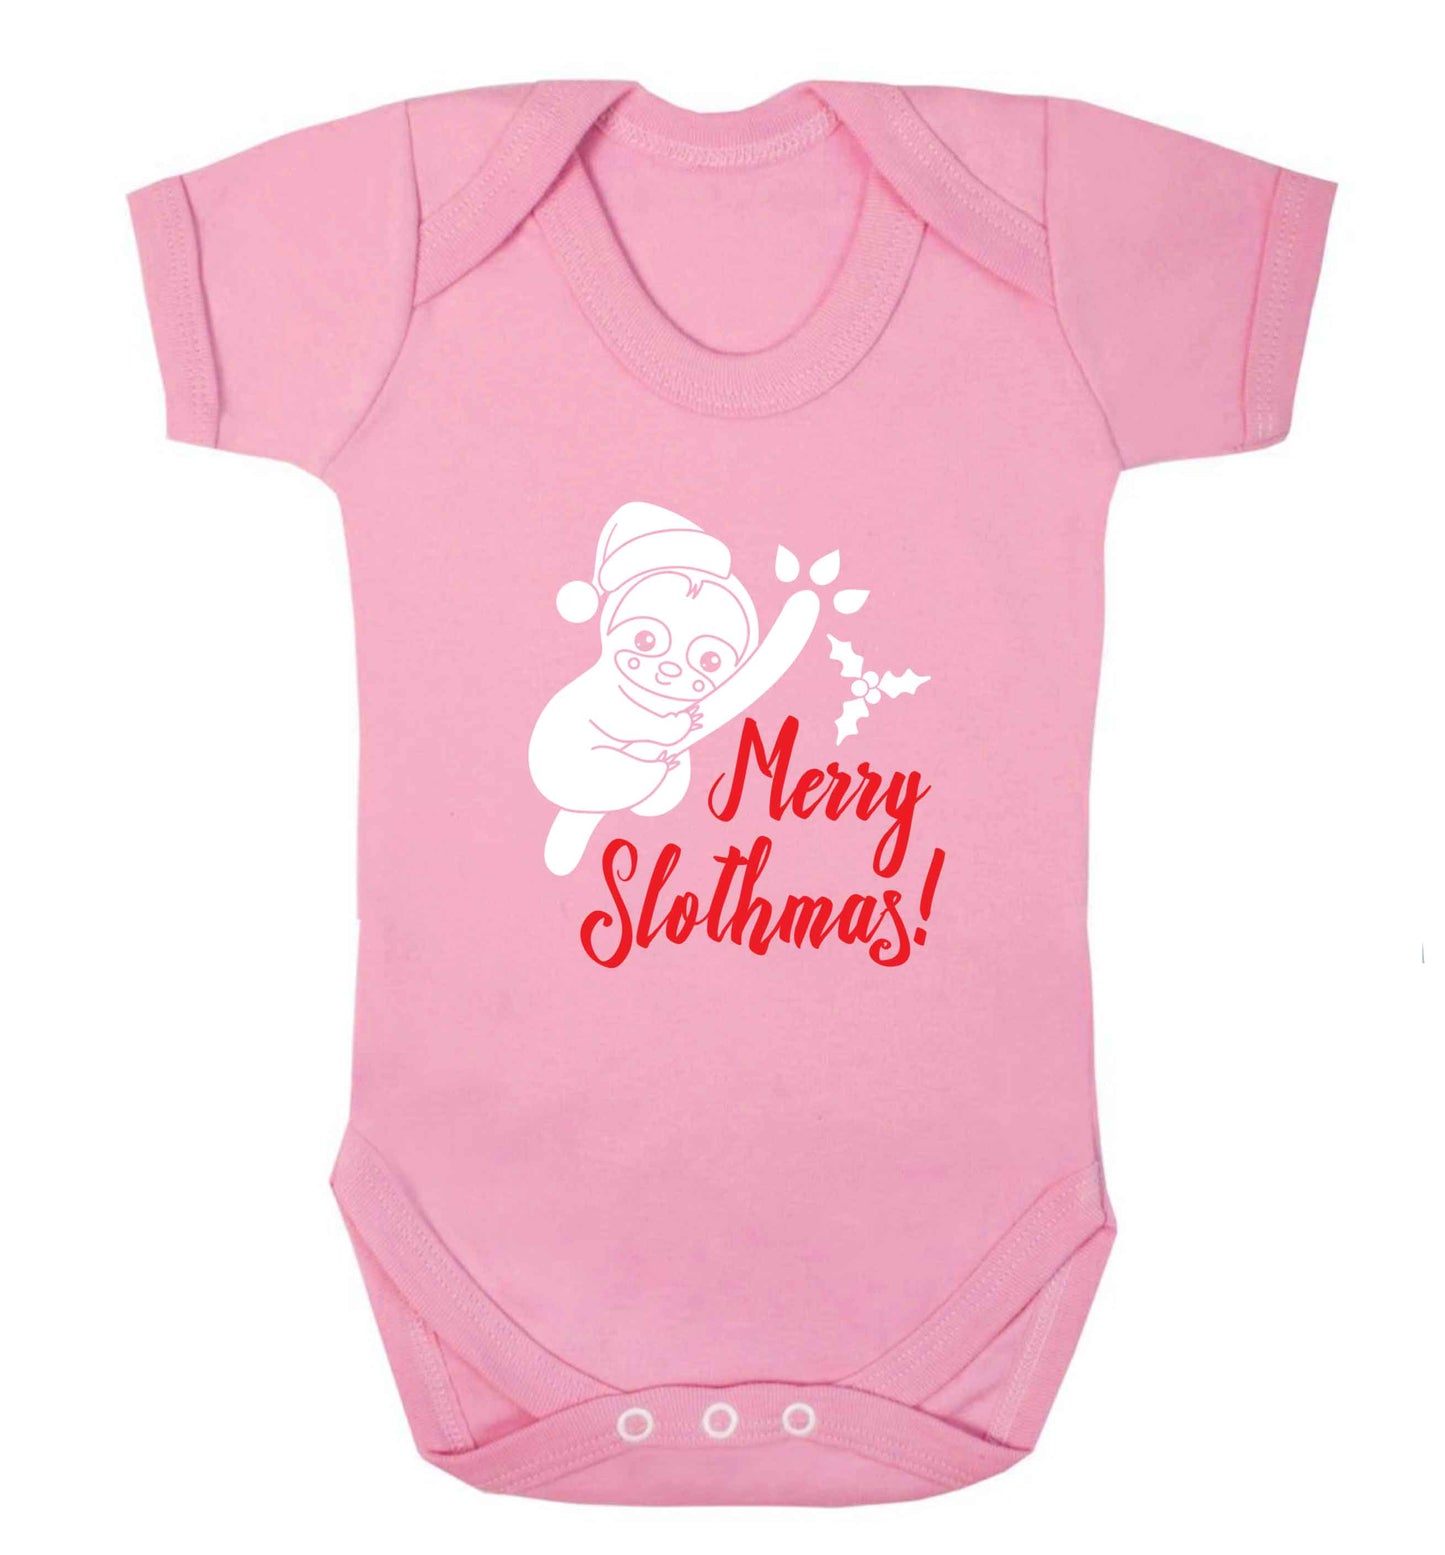 Merry Slothmas baby vest pale pink 18-24 months